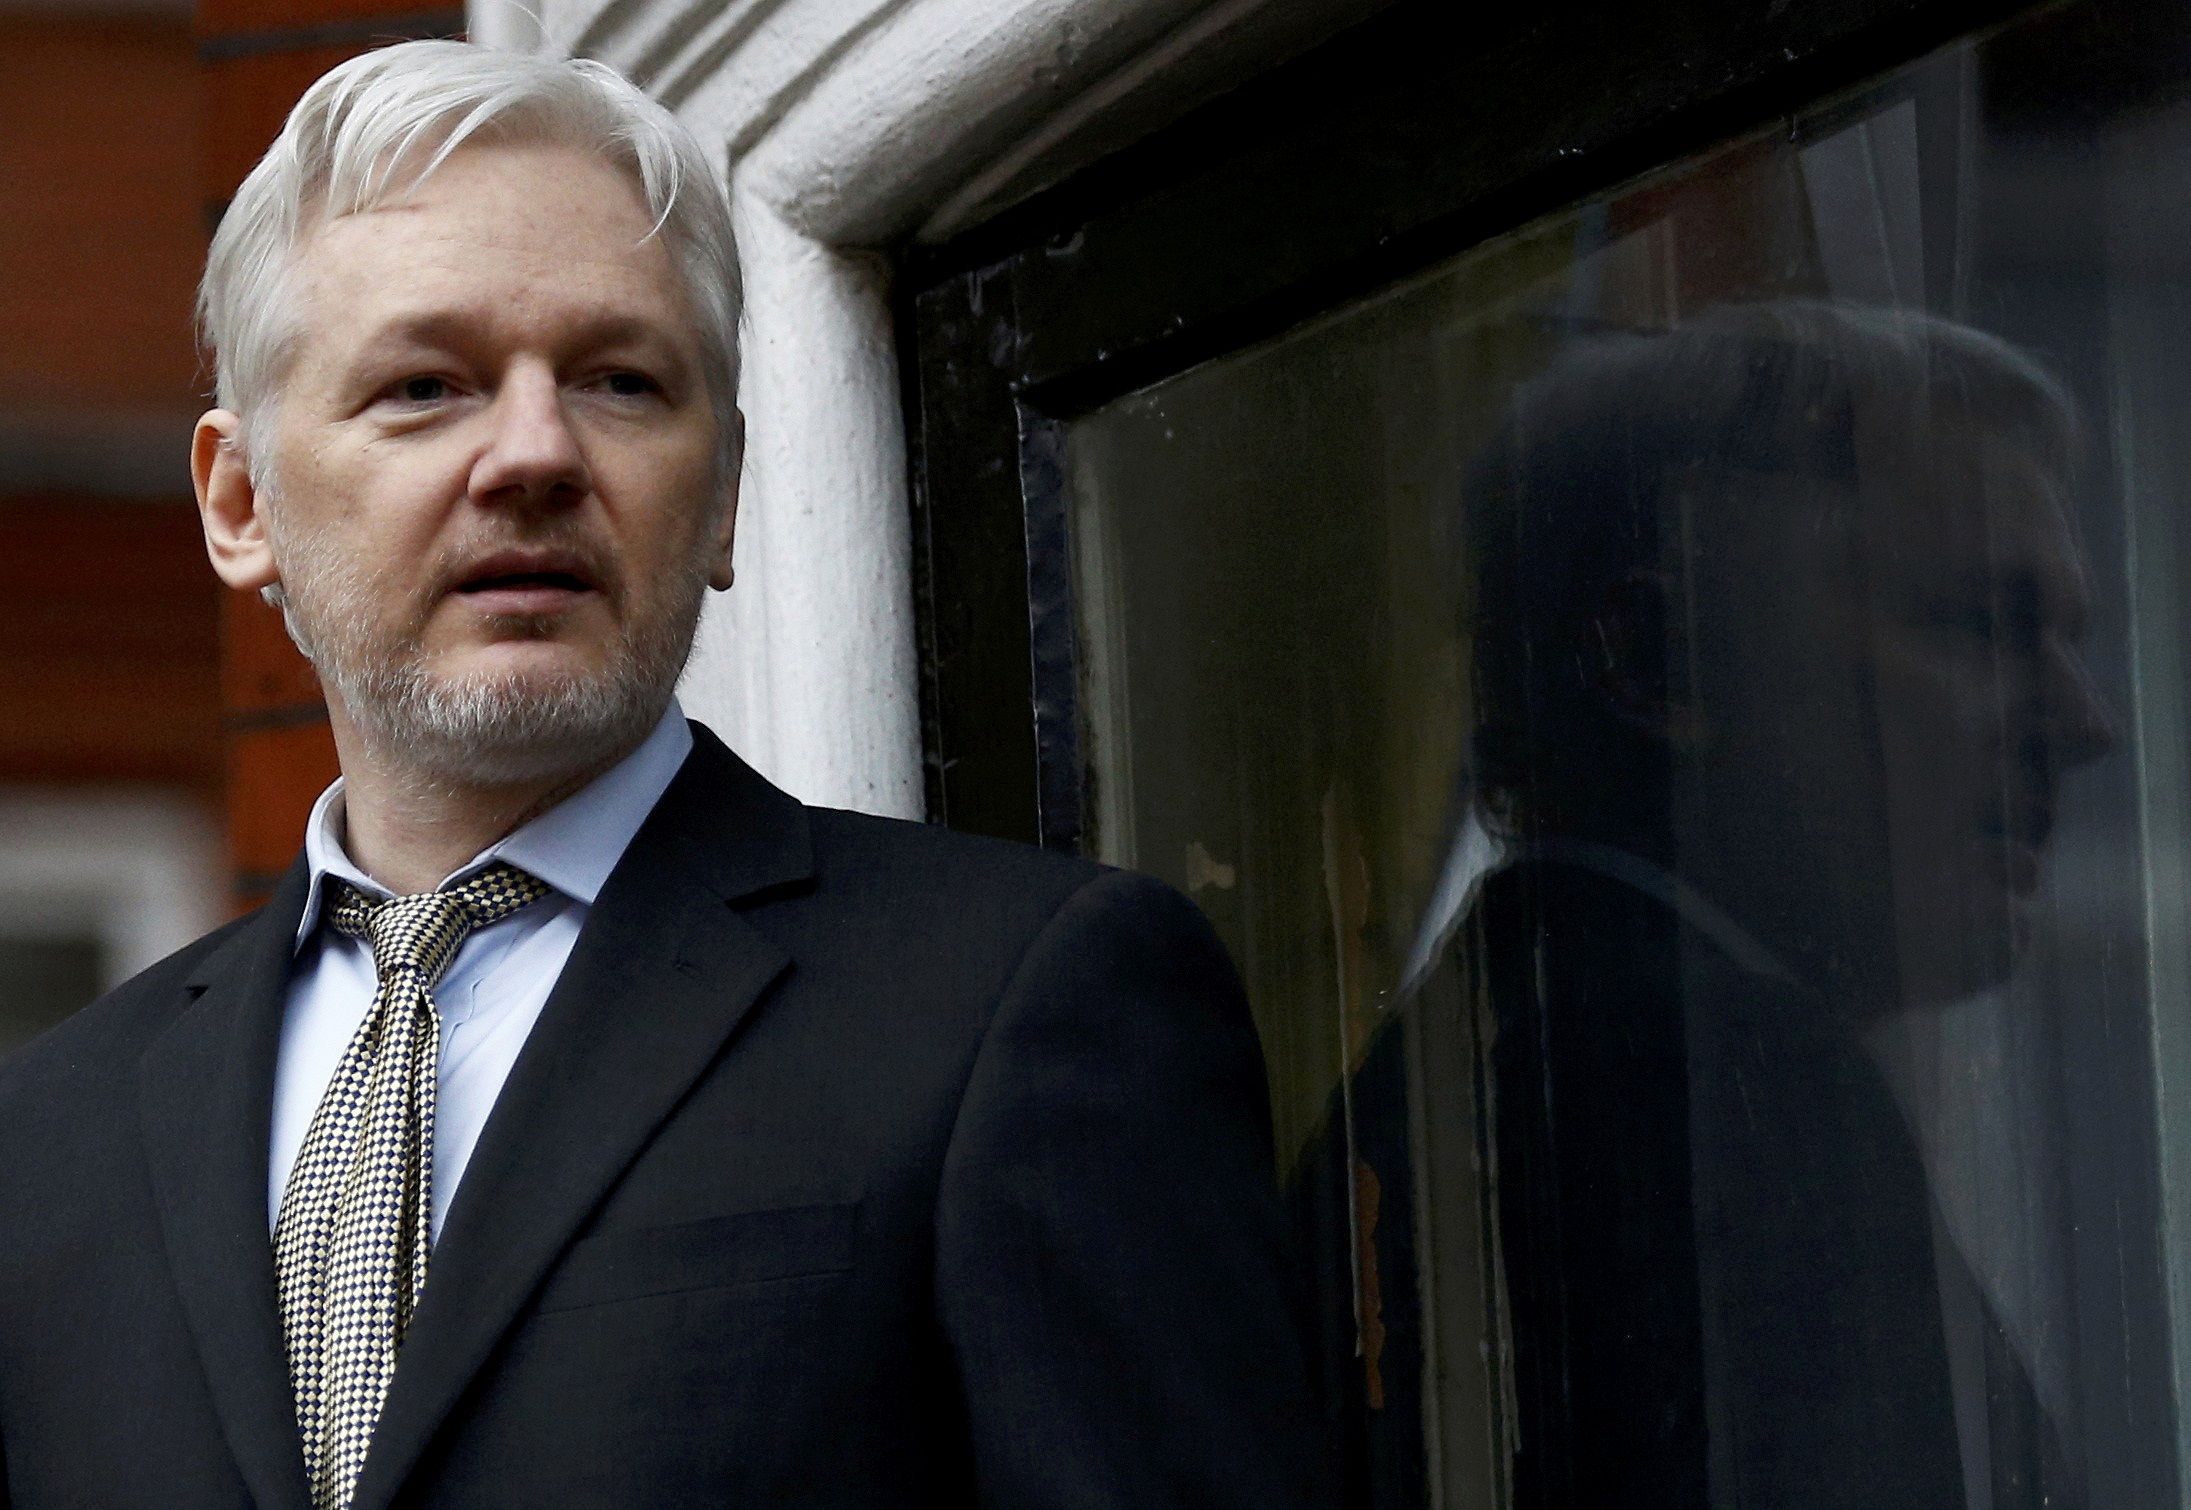 Julian Assange Coming To The US? WikiLeaks Founder Facing Eviction From